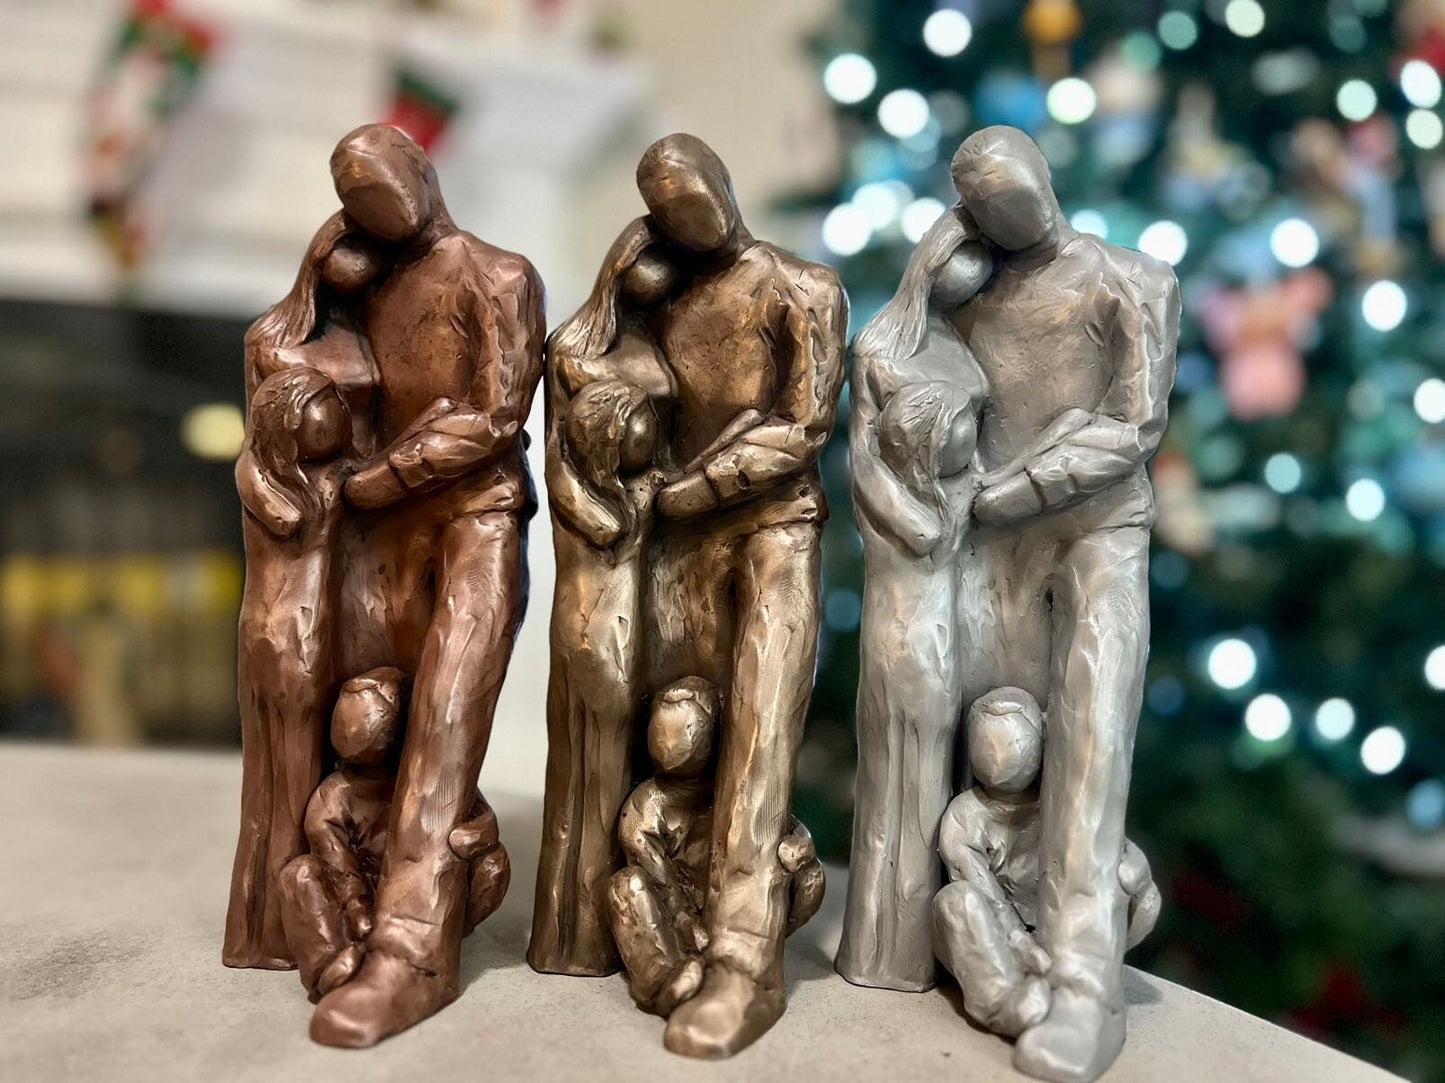 Family of Four Figurine Christmas Gift for Mom, Dad, Husband Wife 7th, 8th, 10th Anniversary Bronze, Aluminum or Copper Gift